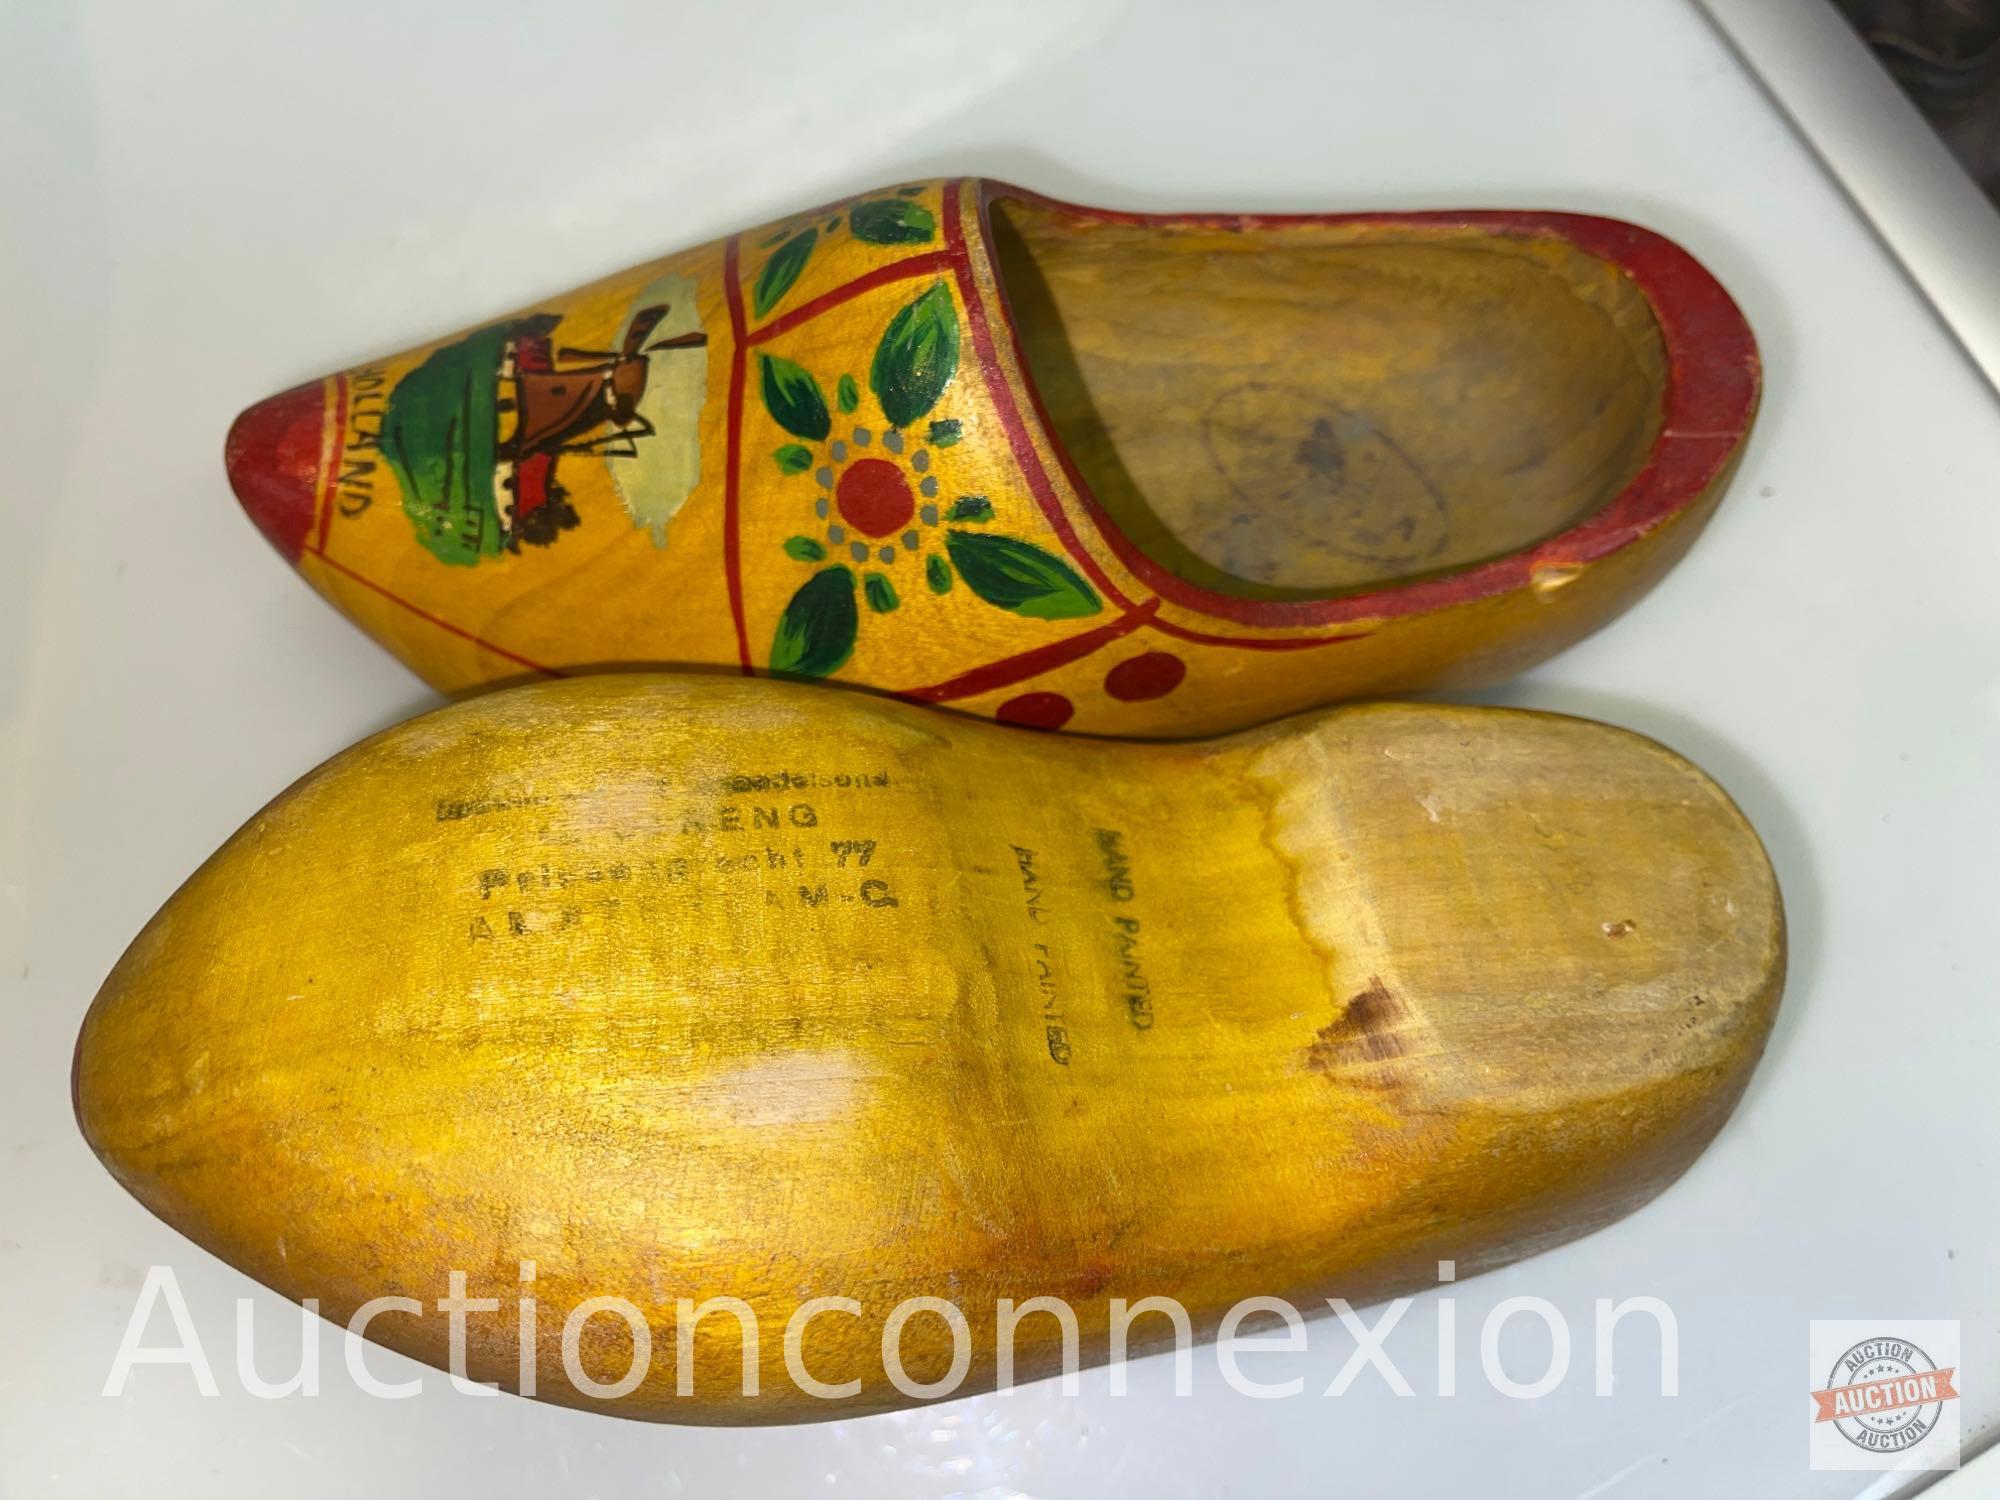 Wooden Shoes - 3 pair hand painted